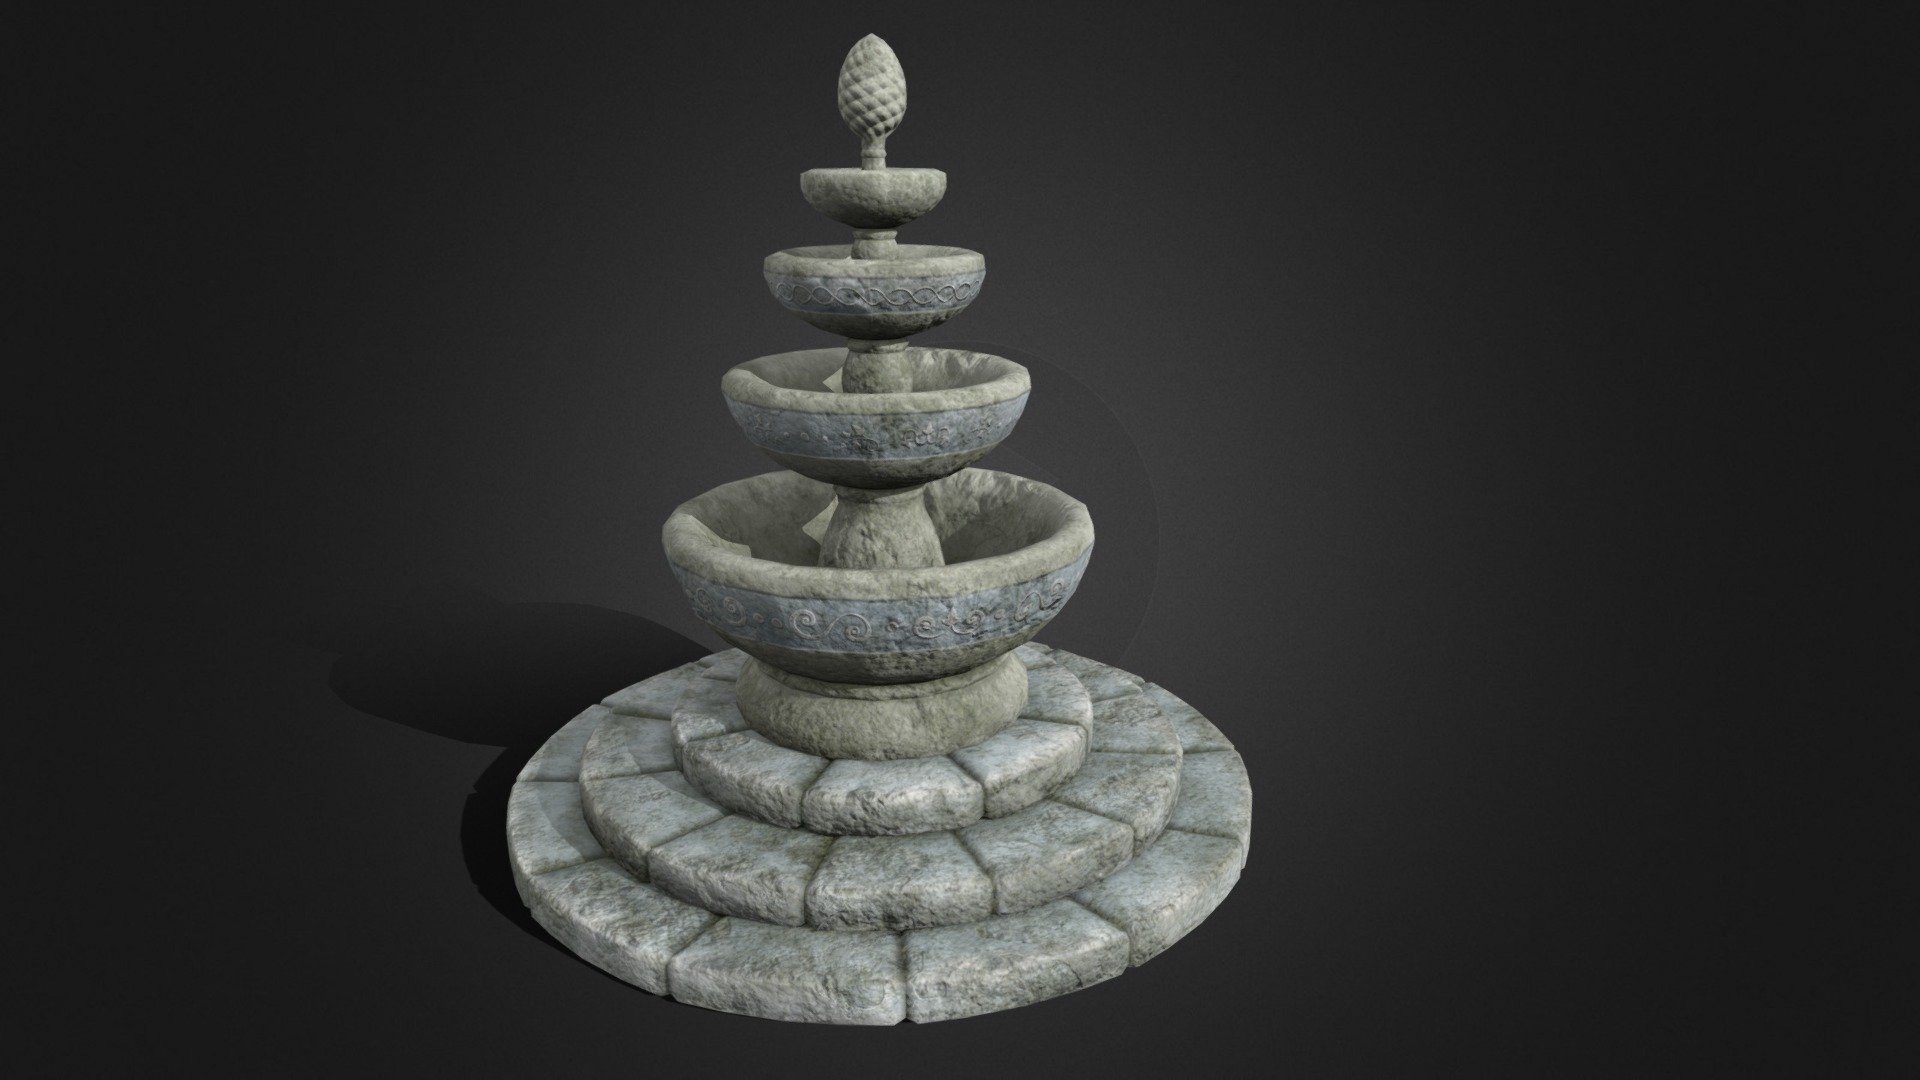 A part of the ancient ruins modular dungeon asset pack. This asstet is optimised for use in games and was created while working for Sunbox Games 3d model